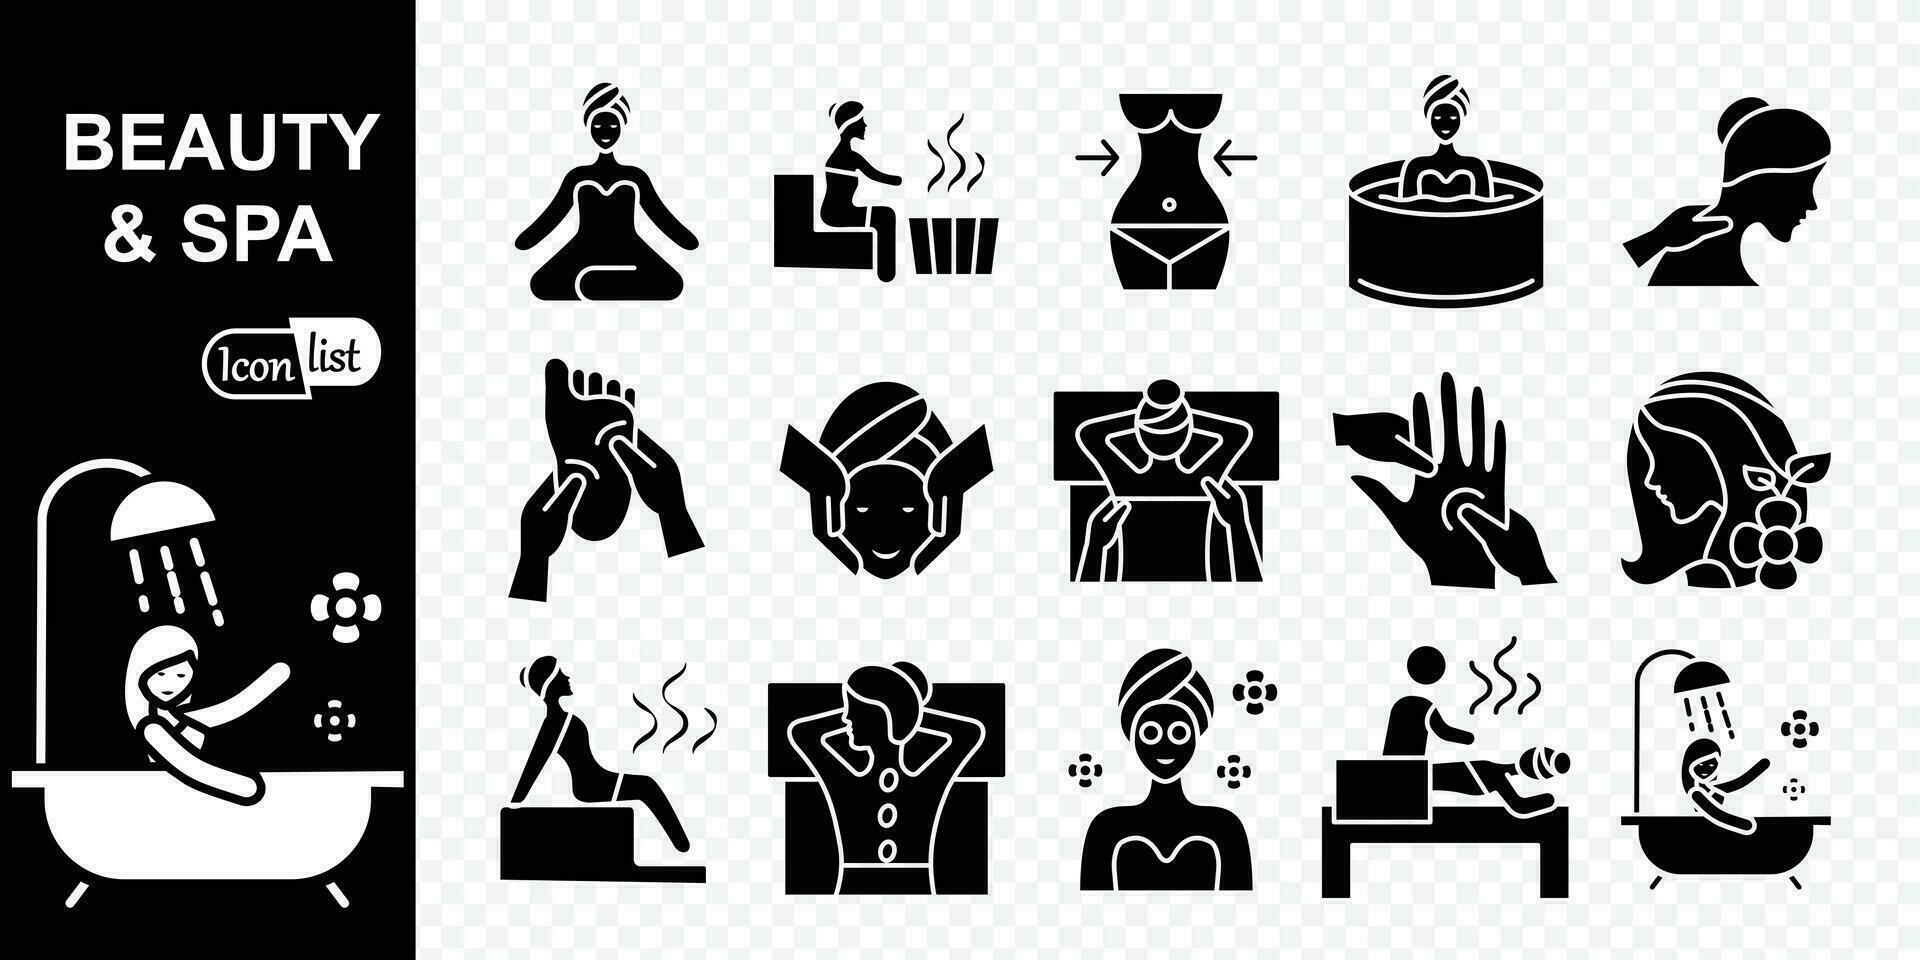 Beauty and Spa icons set .Spa icons for web and mobile app. Vector illustration